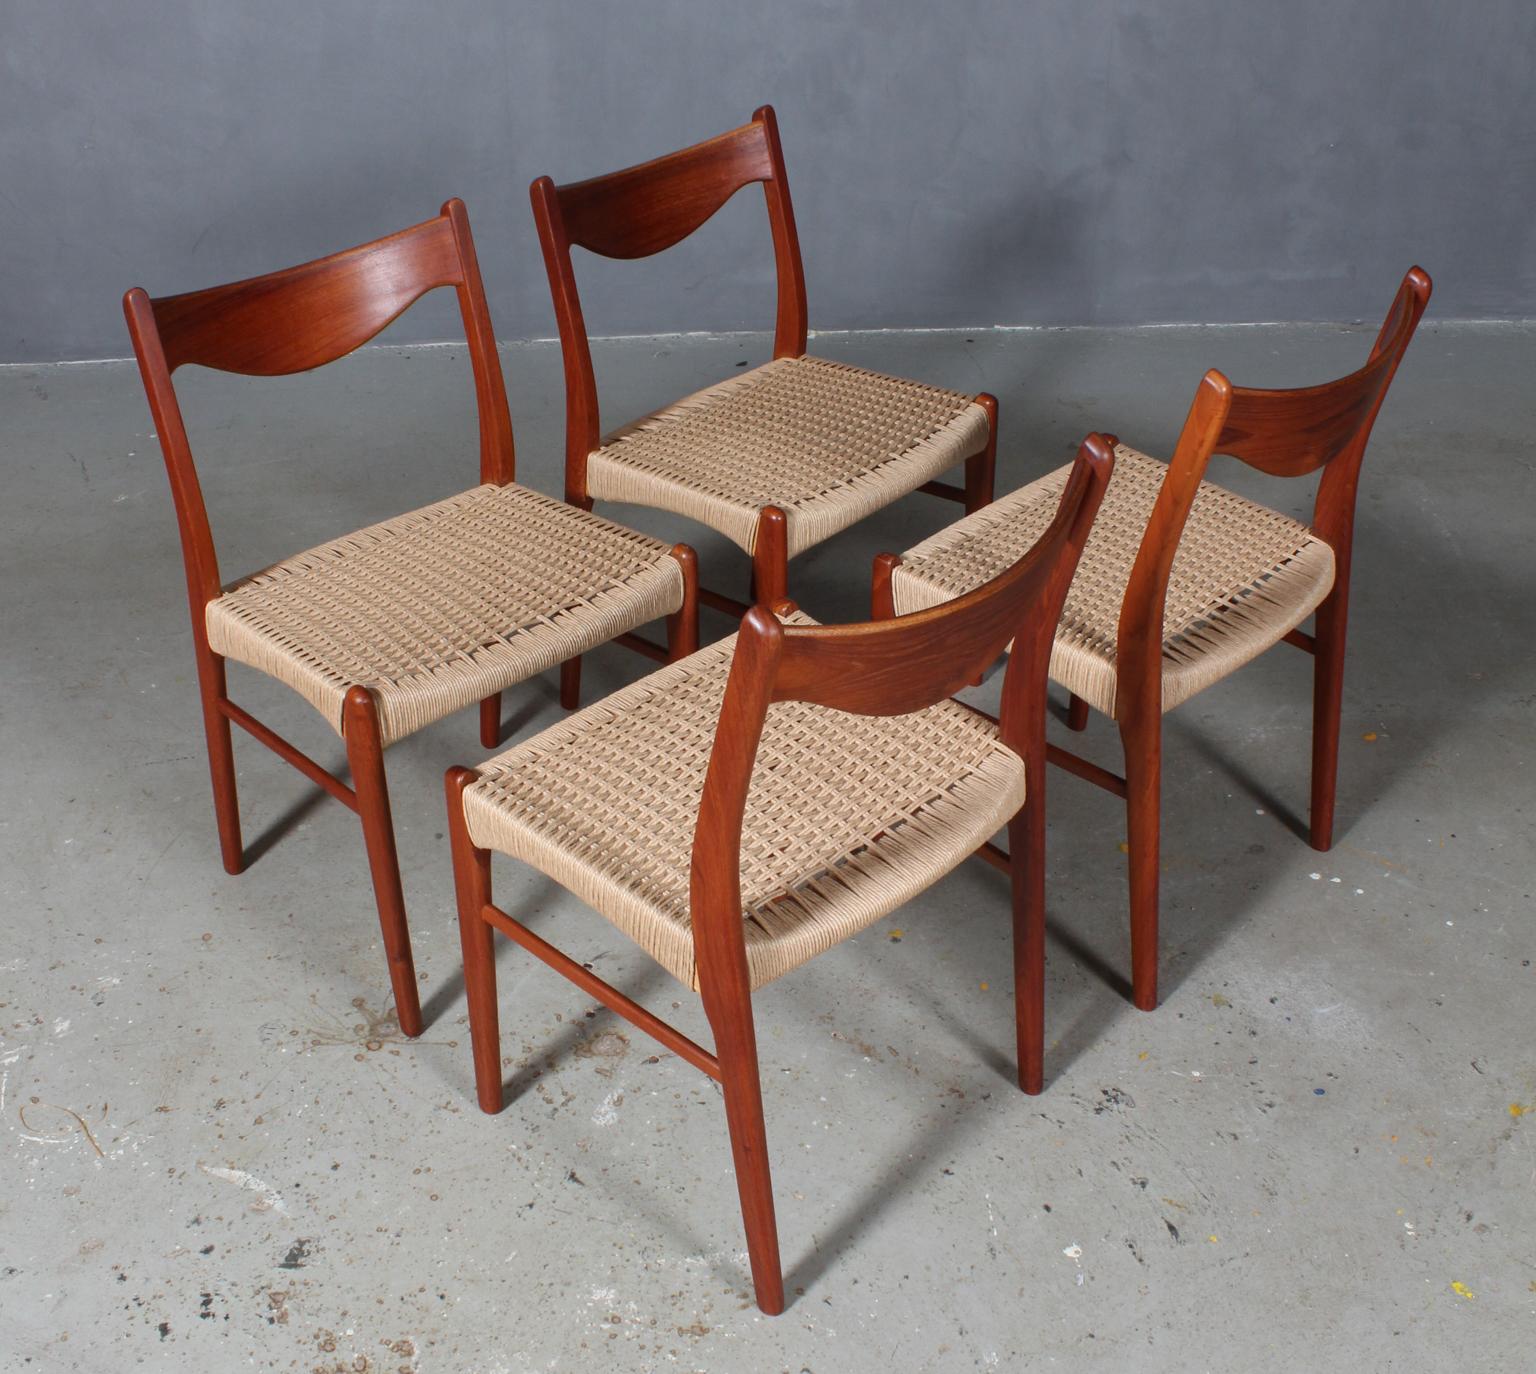 Four dining chairs designed by Arne Wahl, model GS61 for Glyngore Stolefabrik. 

Chairs crafted of partly solid teak with new weaved paper cord seats.